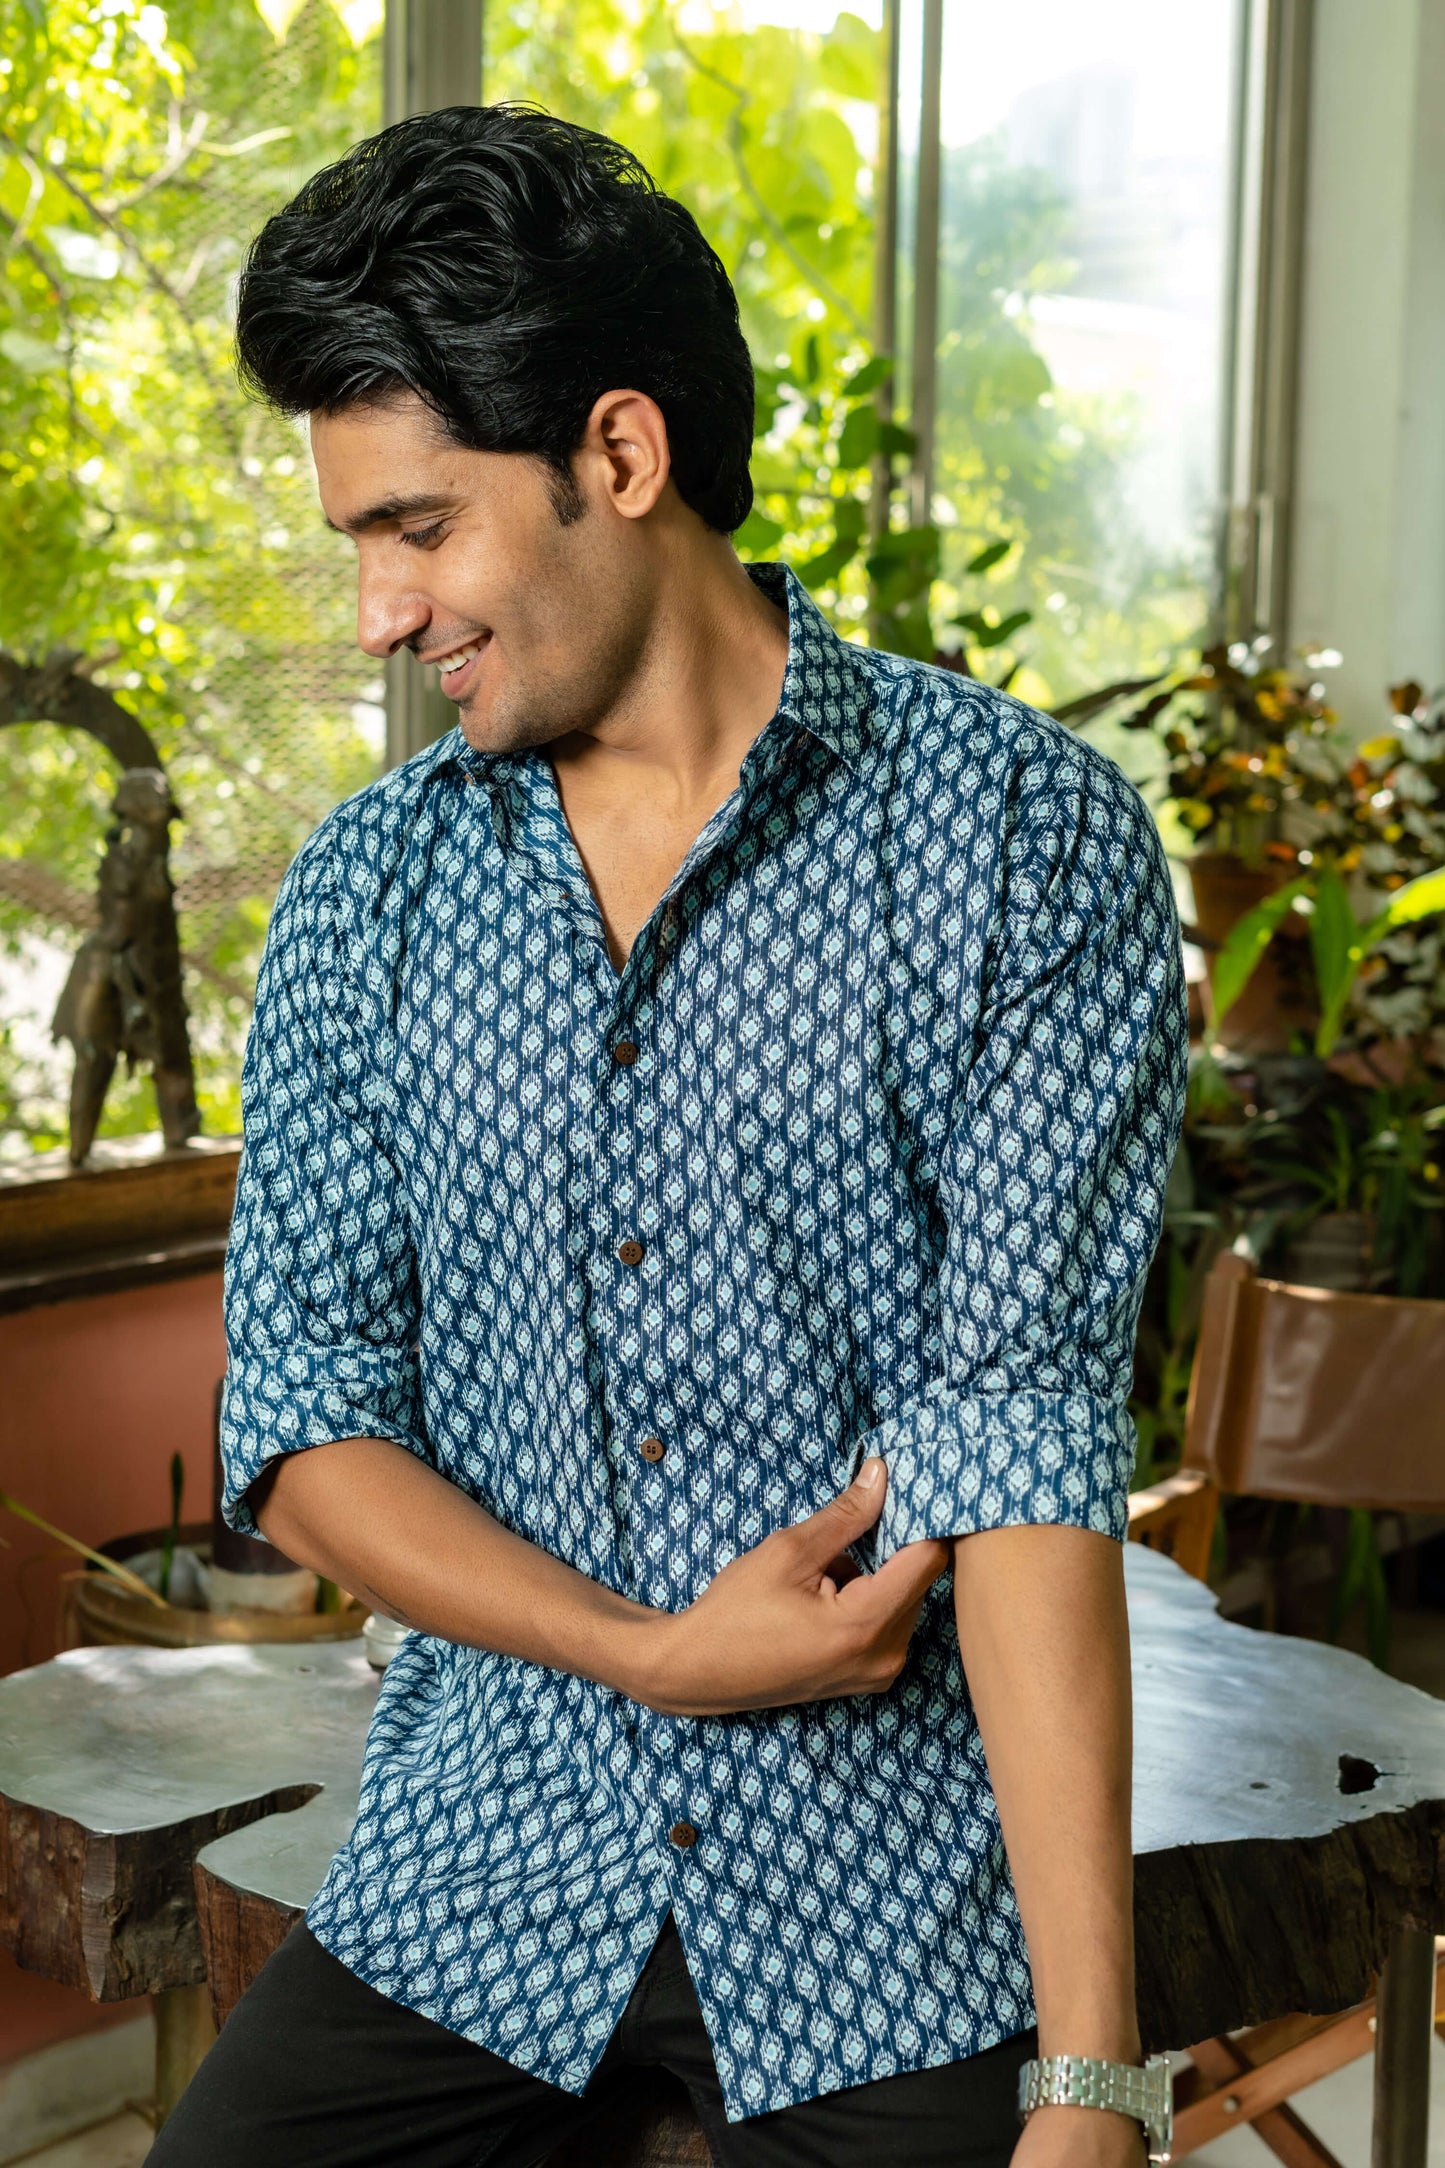 Men Wearing Blue Color Shirt and Folding Sleeves